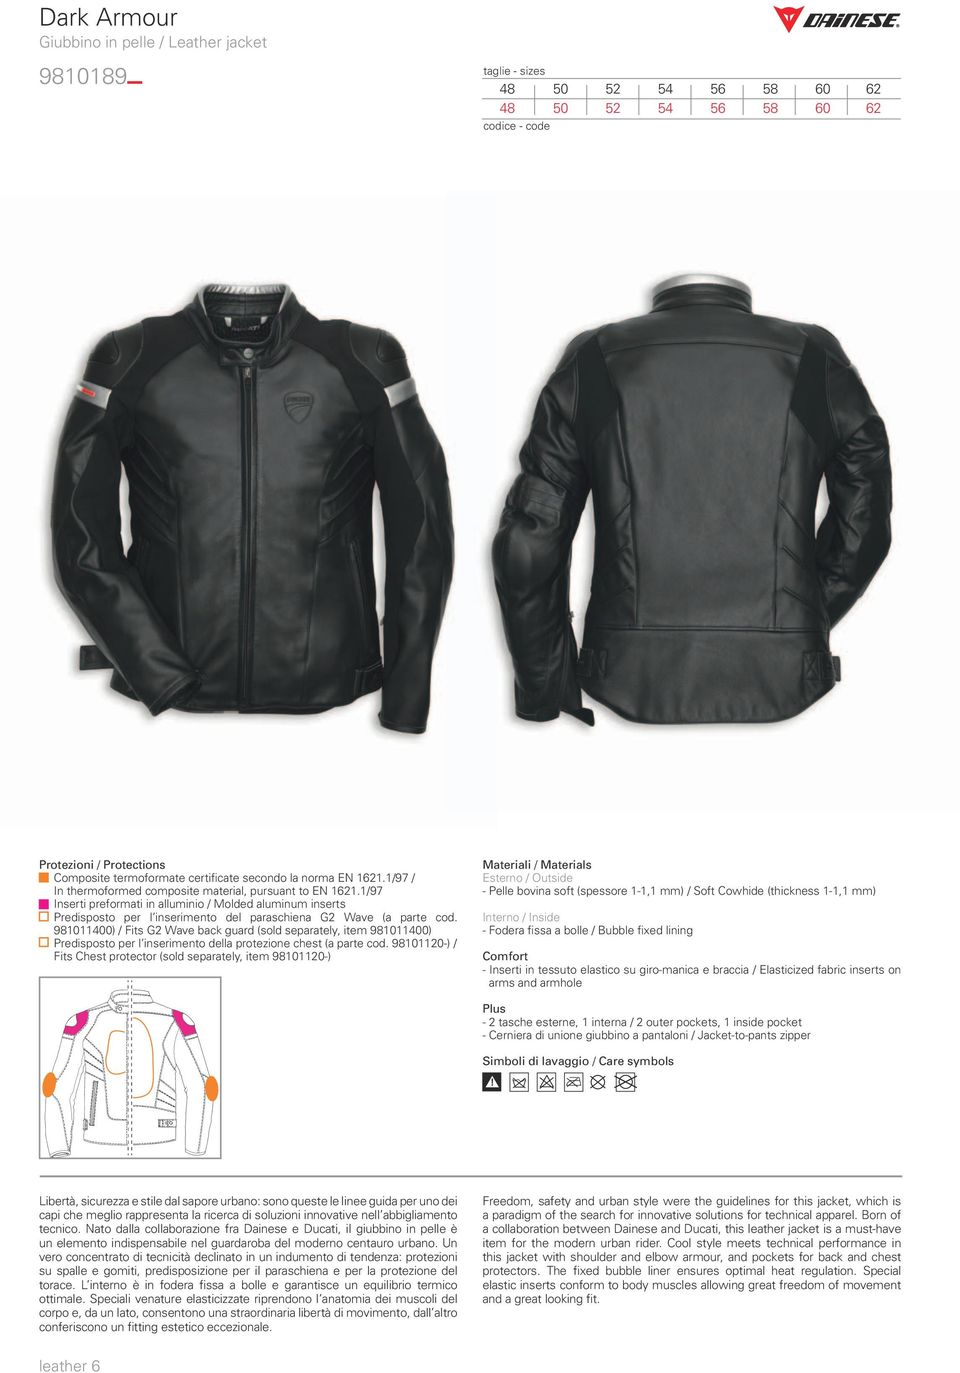 98101120-) / Fits Chest protector (sold separately, item 98101120-) - Pelle bovina soft (spessore 1-1,1 mm) / Soft Cowhide (thickness 1-1,1 mm) - Fodera fissa a bolle / Bubble fixed lining - Inserti